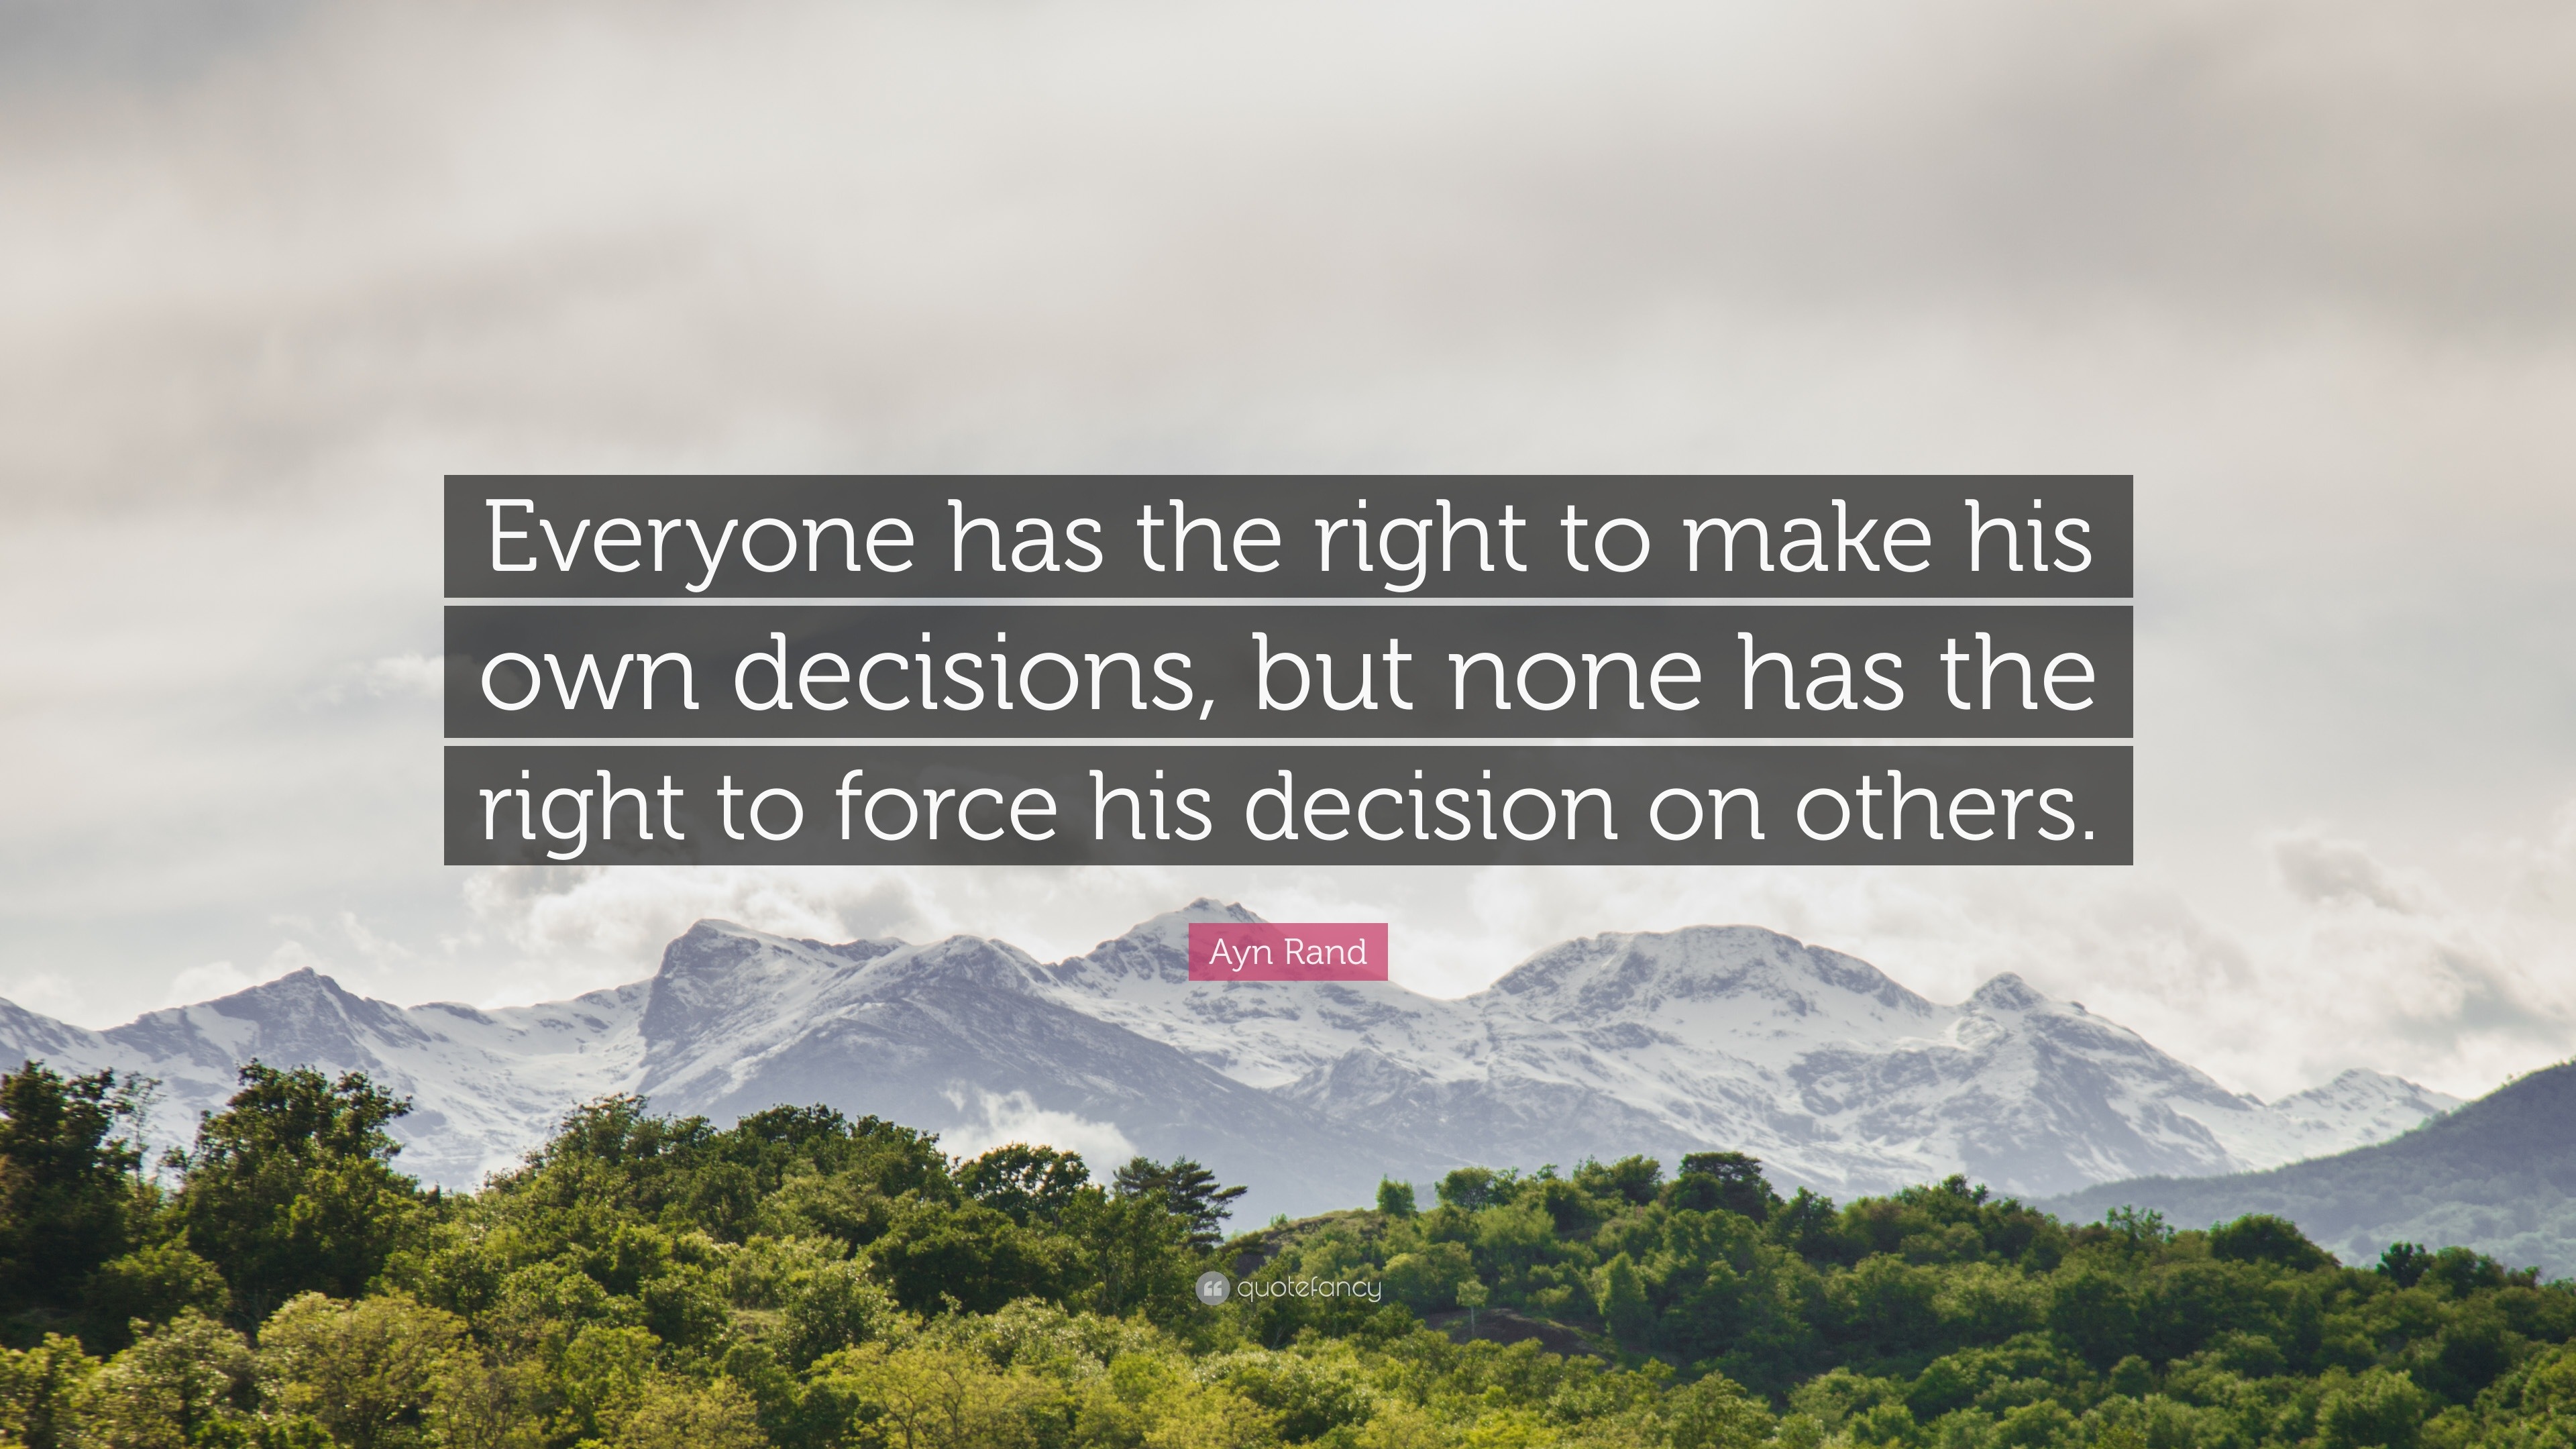 Ayn Rand Quote Everyone Has The Right To Make His Own Decisions But None Has The